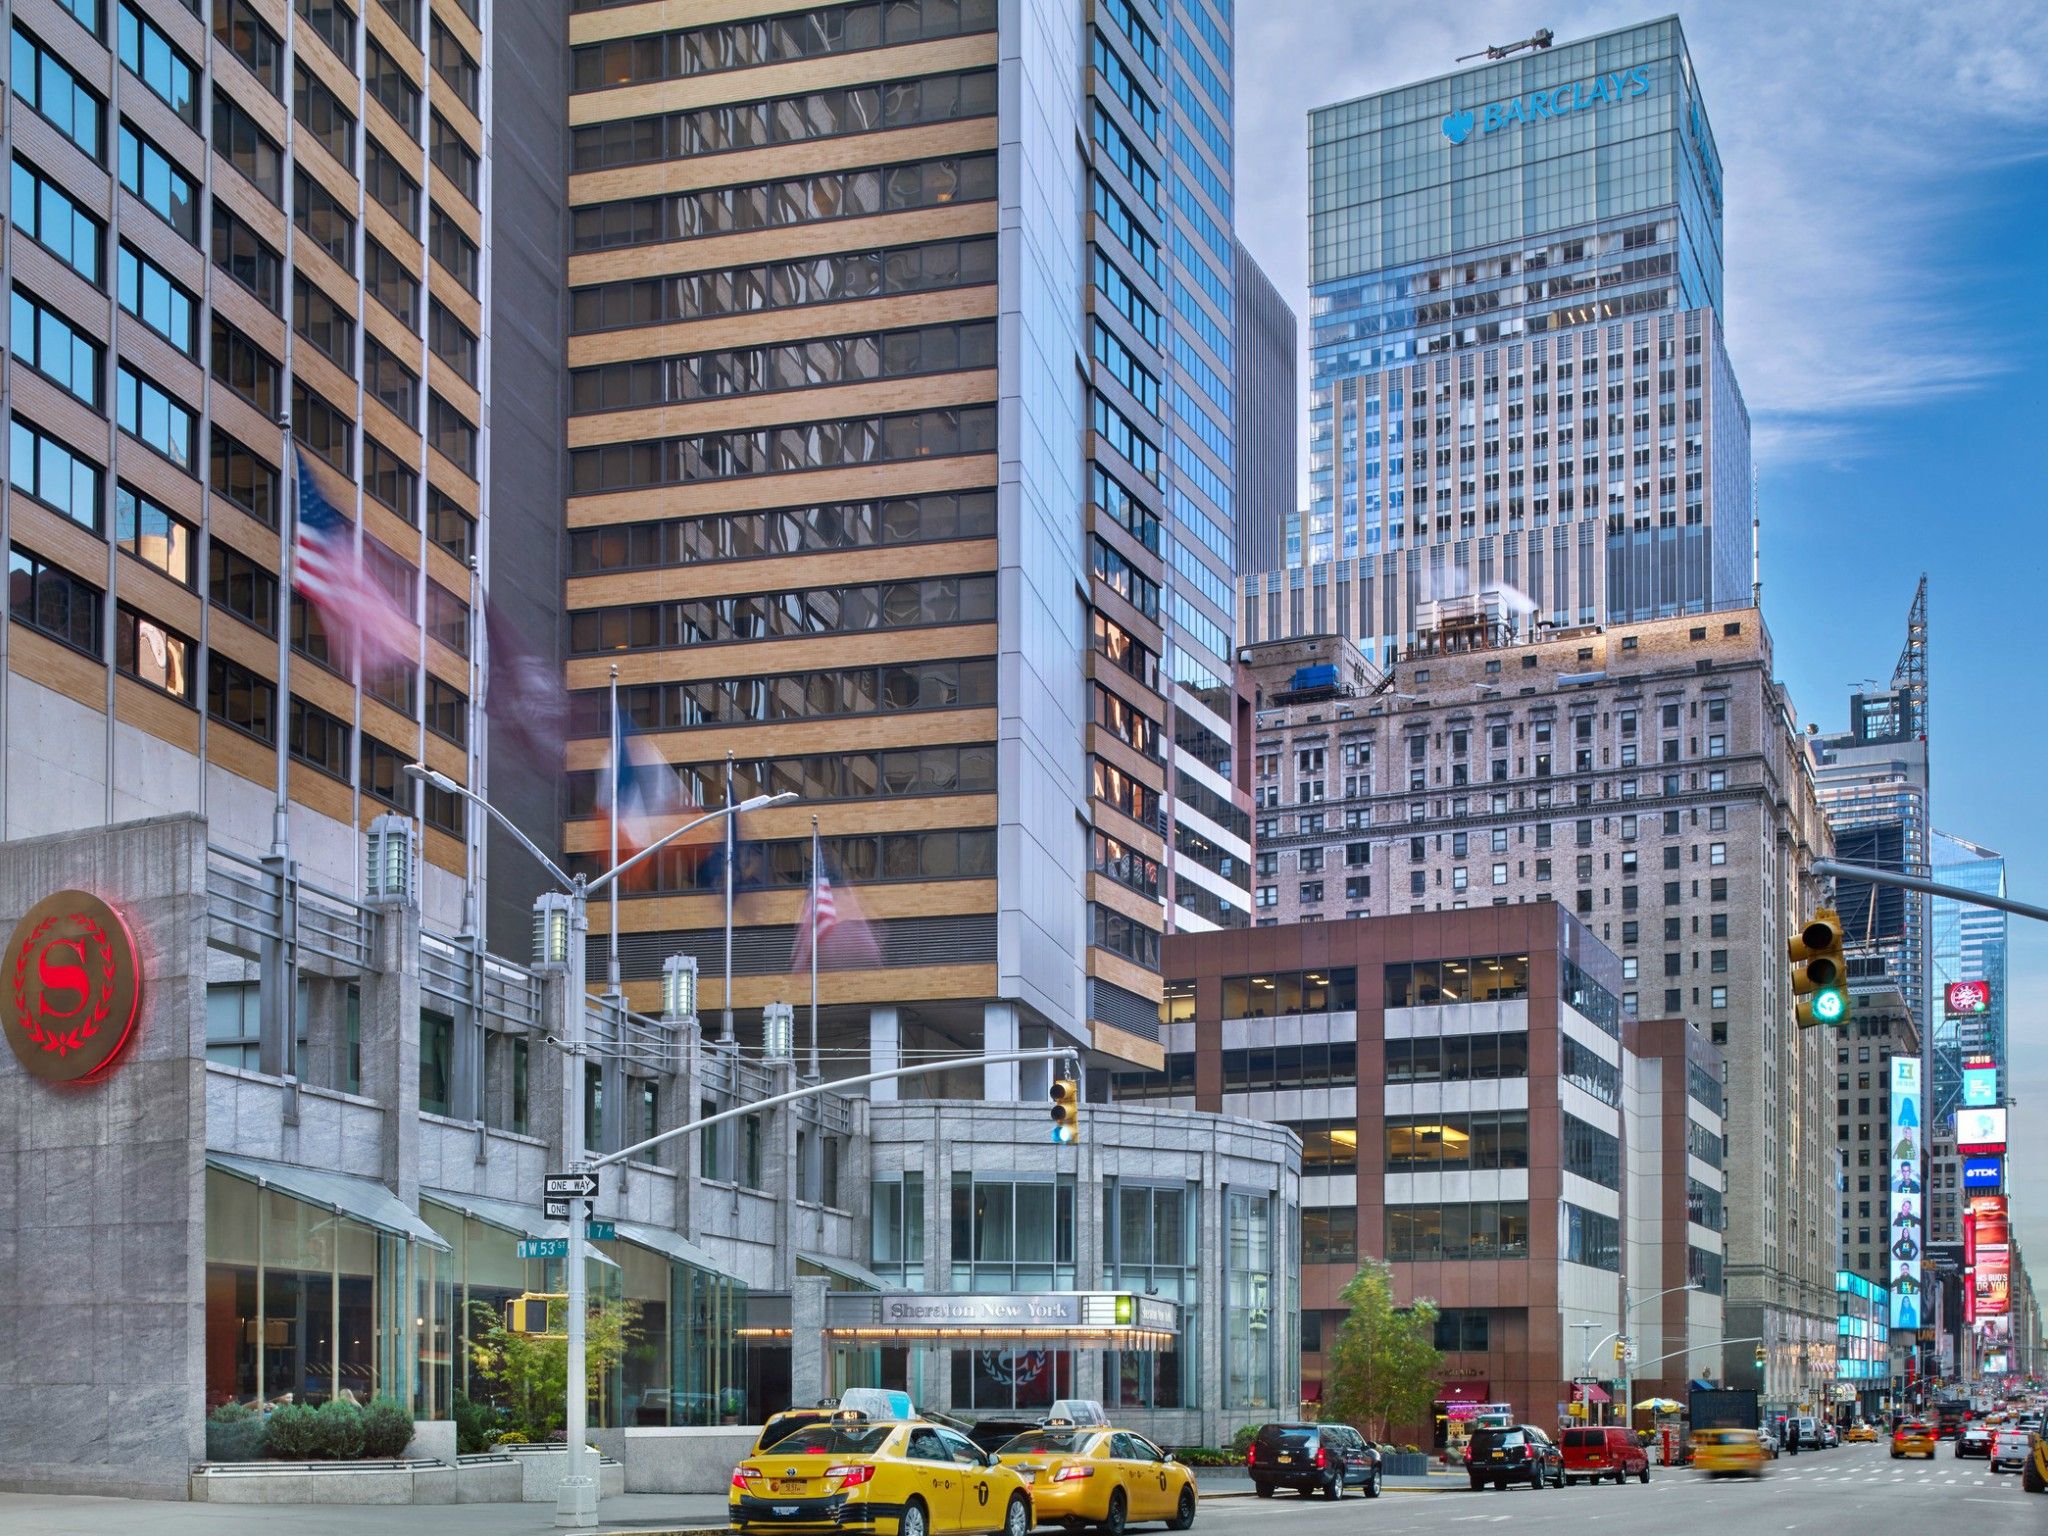 Times Square NYC Hotels | Sheraton New York Times Square Hotel